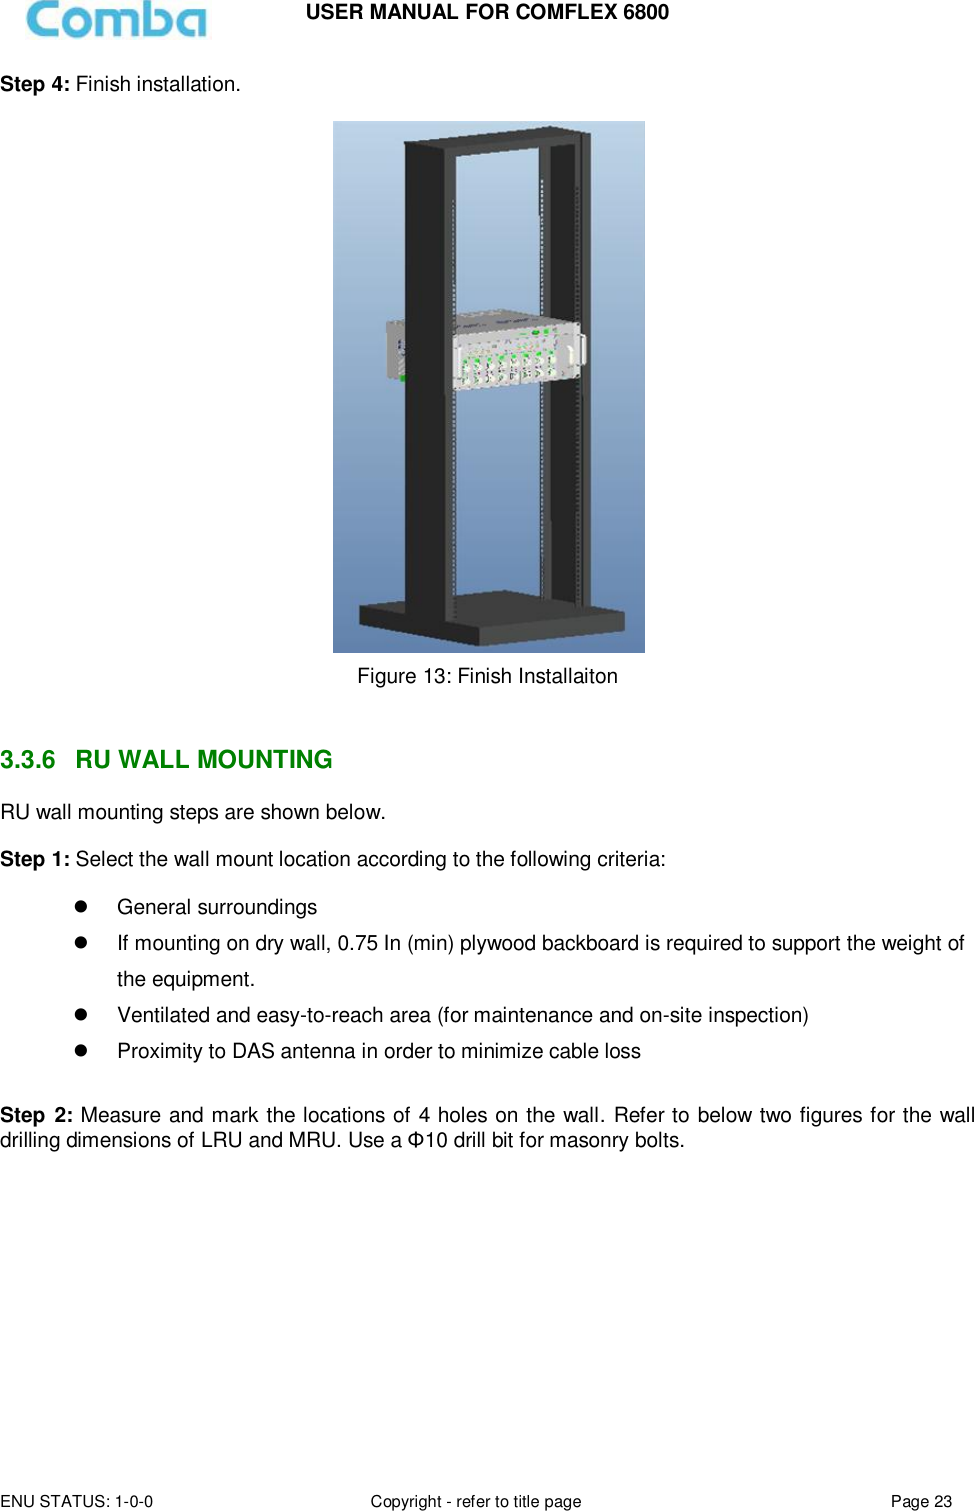 USER MANUAL FOR COMFLEX 6800 ENU STATUS: 1-0-0 Copyright - refer to title page Page 23  Step 4: Finish installation.   Figure 13: Finish Installaiton   3.3.6  RU WALL MOUNTING RU wall mounting steps are shown below.  Step 1: Select the wall mount location according to the following criteria:    General surroundings   If mounting on dry wall, 0.75 In (min) plywood backboard is required to support the weight of the equipment.   Ventilated and easy-to-reach area (for maintenance and on-site inspection)   Proximity to DAS antenna in order to minimize cable loss  Step 2: Measure and mark the locations of 4 holes on the wall. Refer to below two figures for the wall drilling dimensions of LRU and MRU. Use a Φ10 drill bit for masonry bolts.           